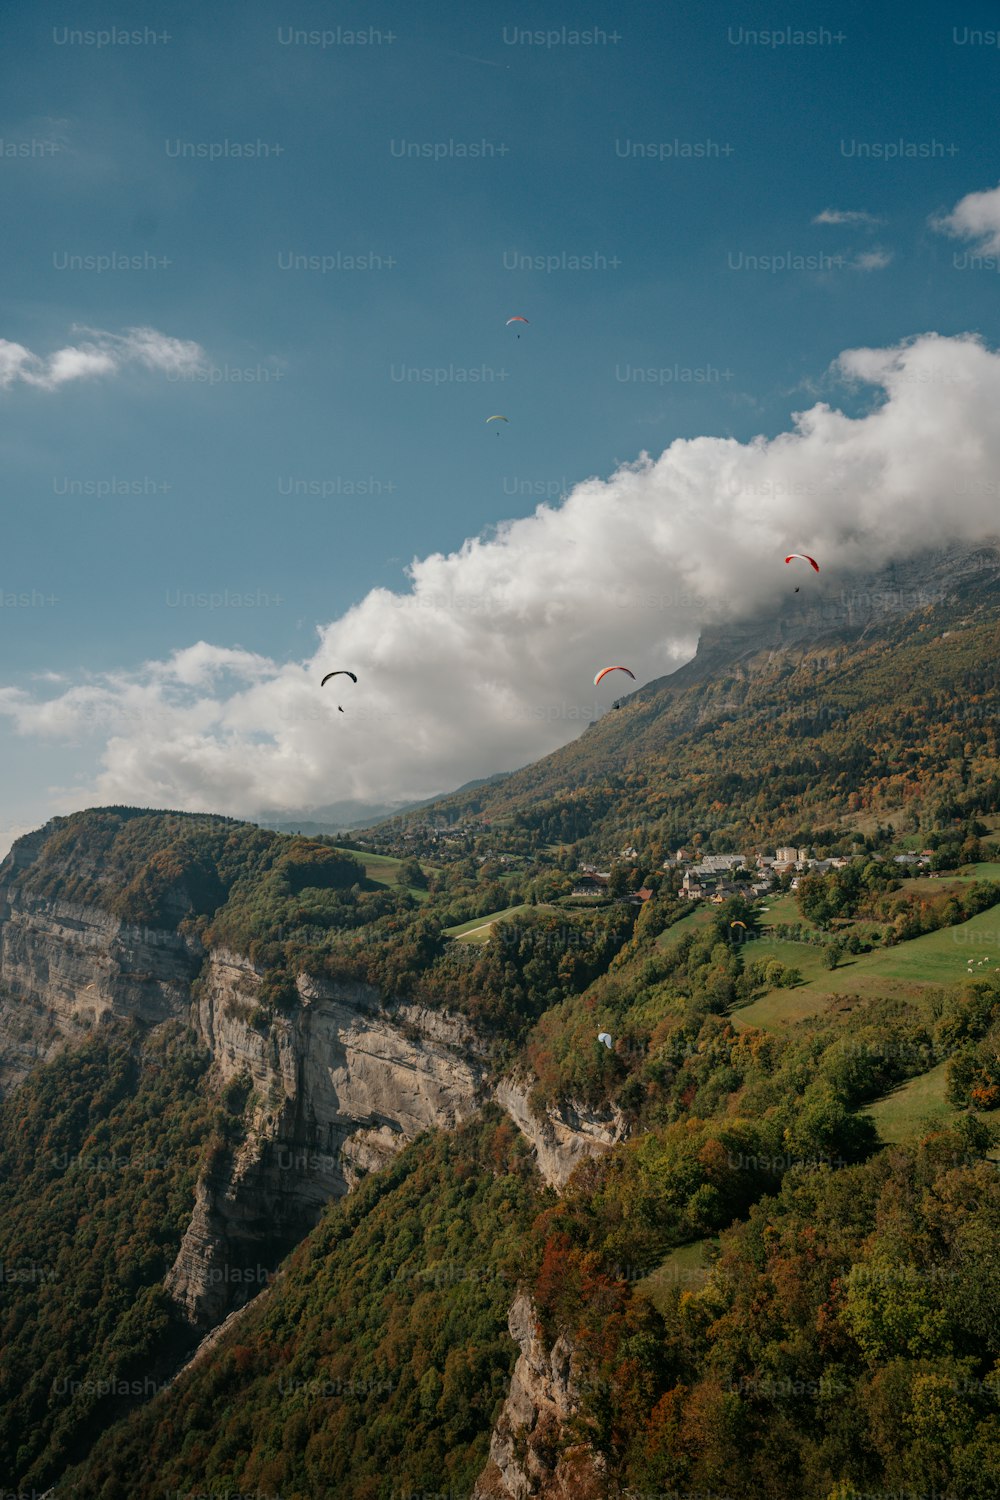 a group of people flying kites over a lush green hillside